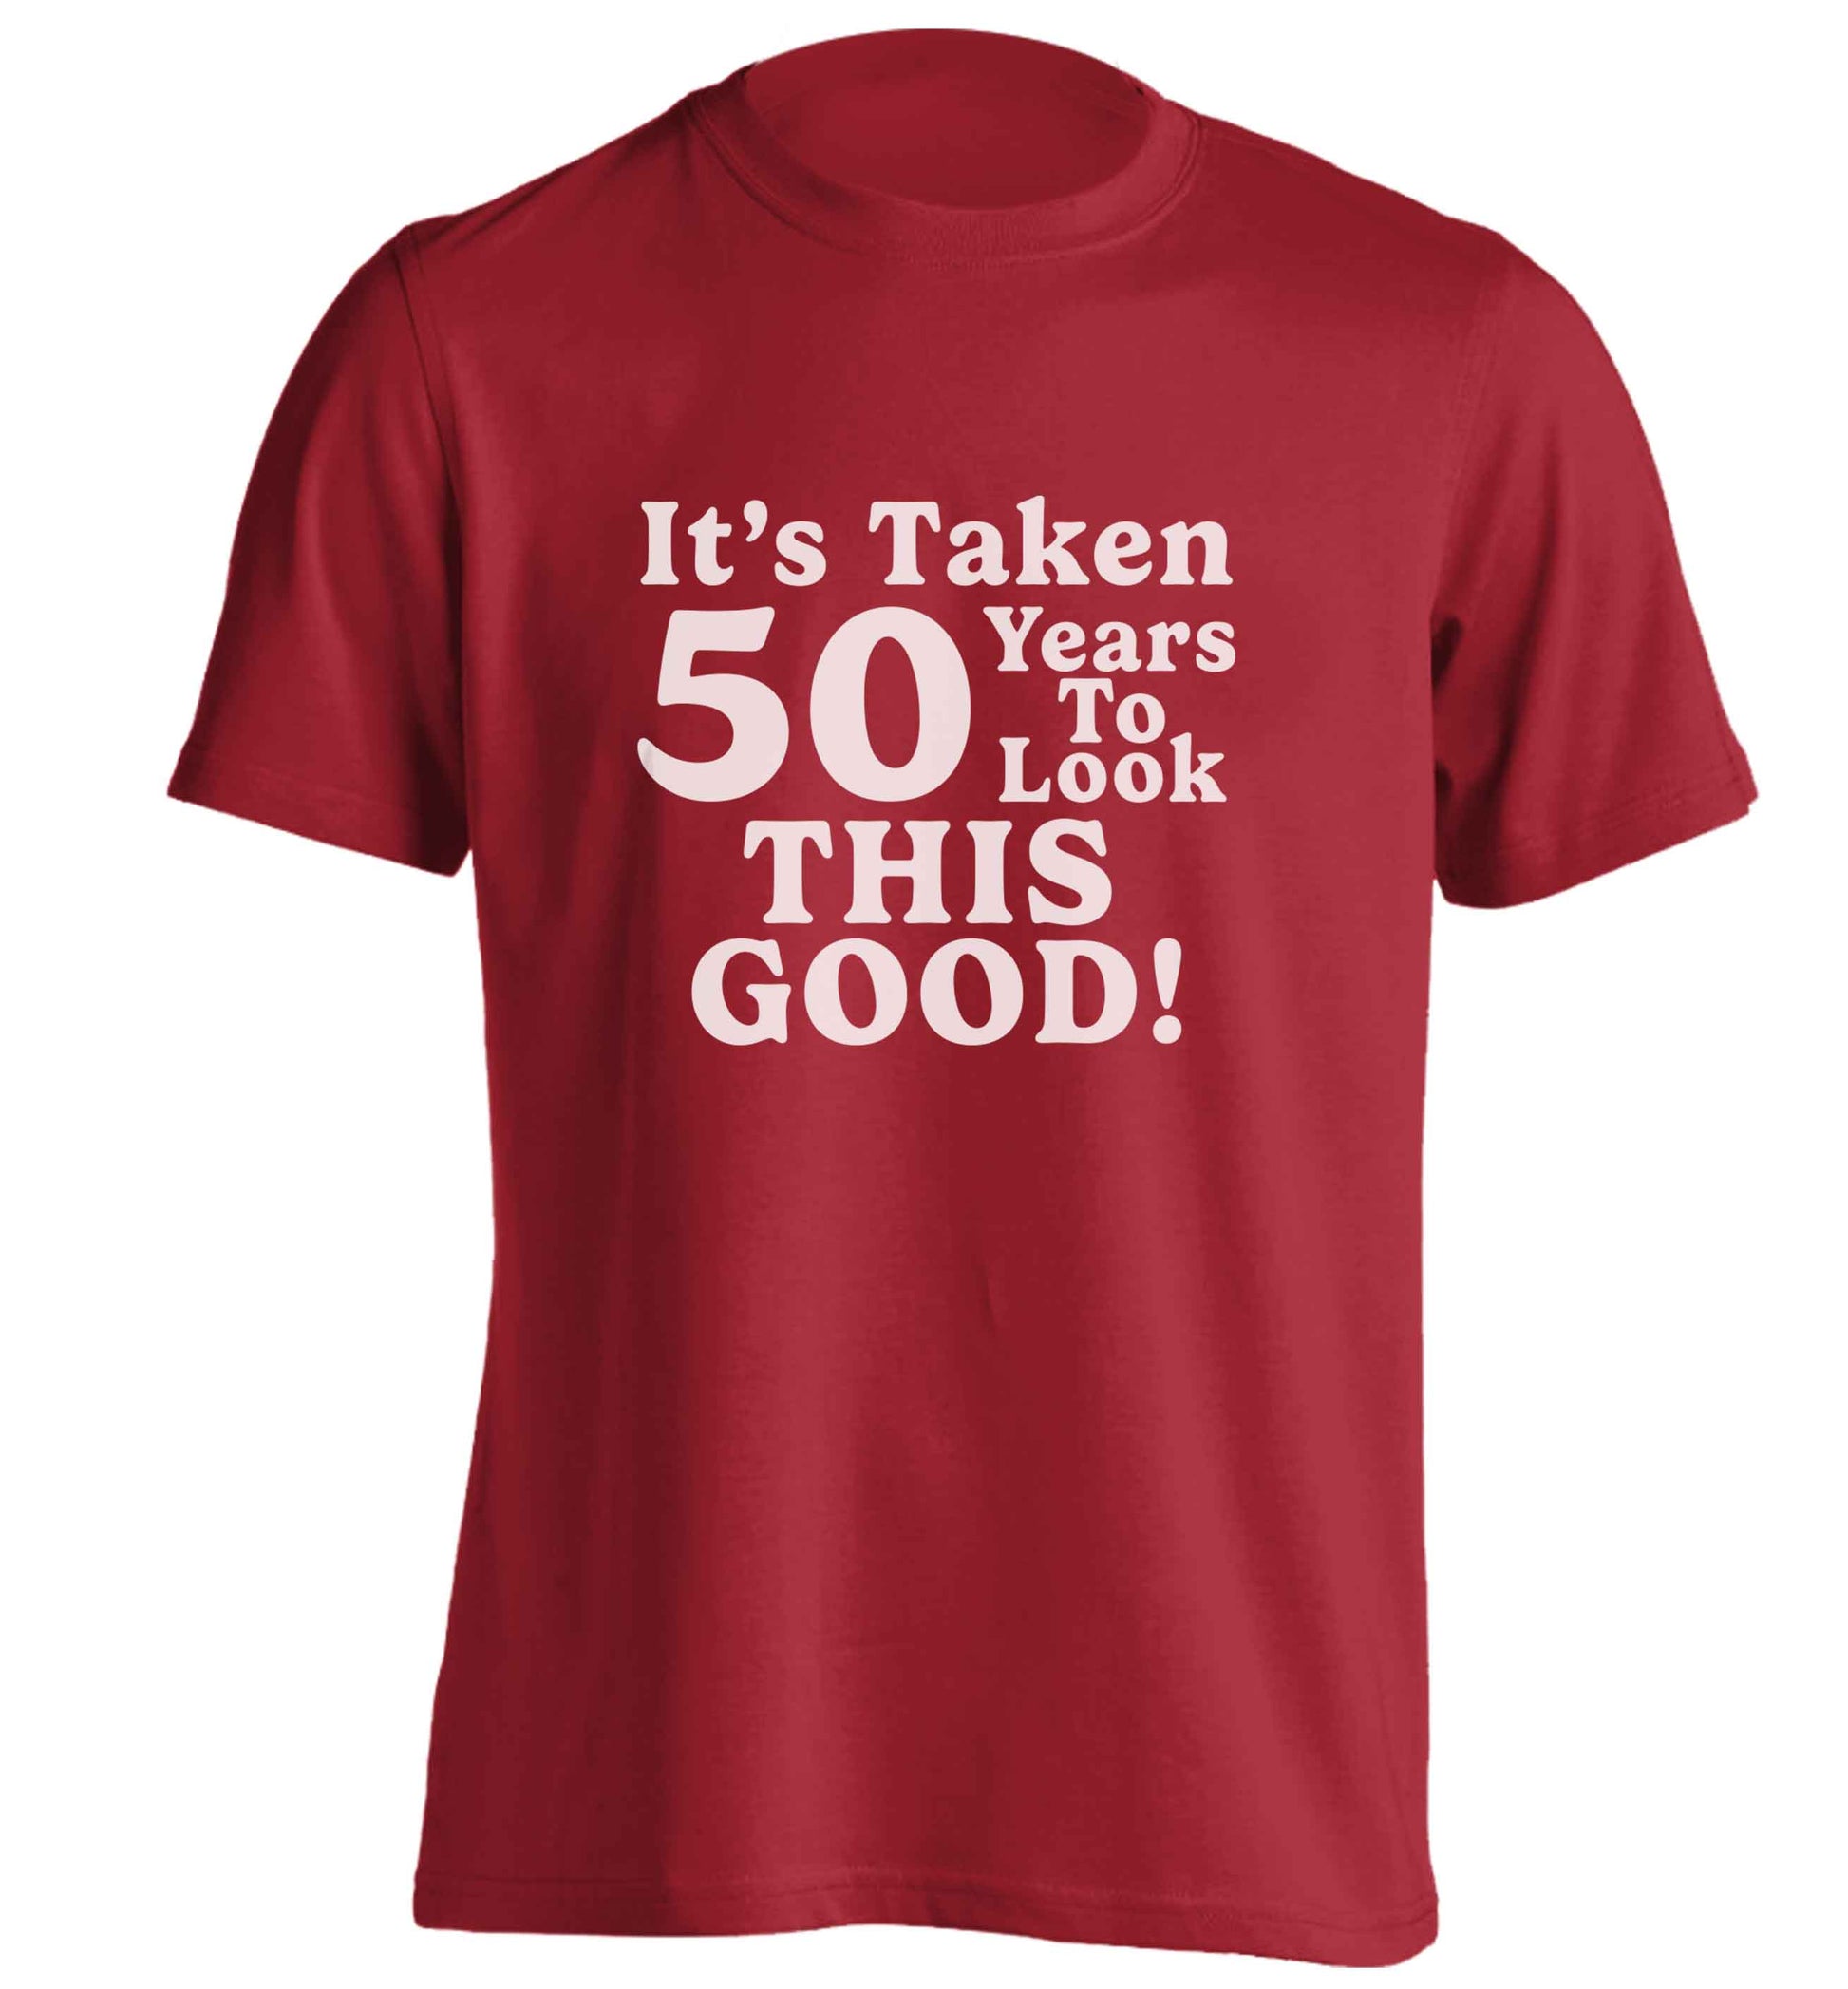 It's taken 50 years to look this good! adults unisex red Tshirt 2XL